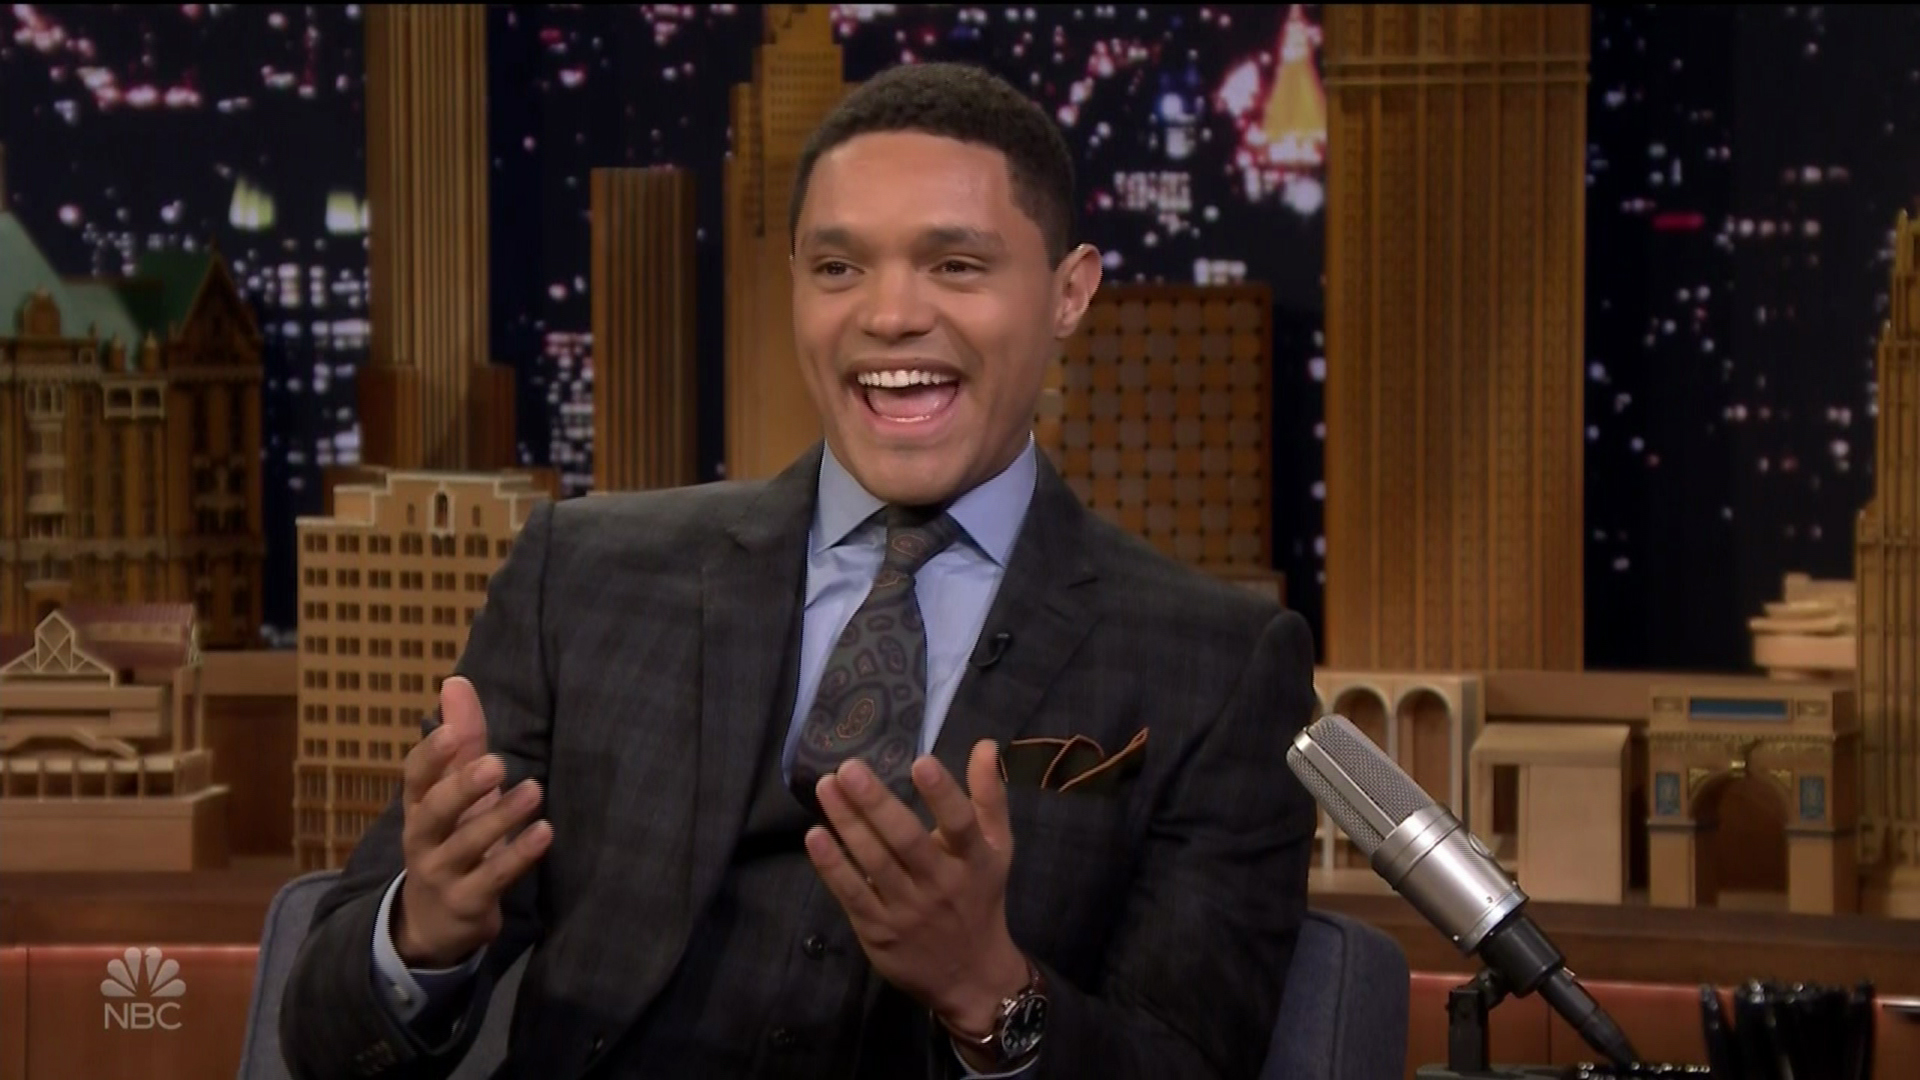 Trevor Noah during an appearance on NBC's 'The Tonight Show Starring Jimmy Fallon.'